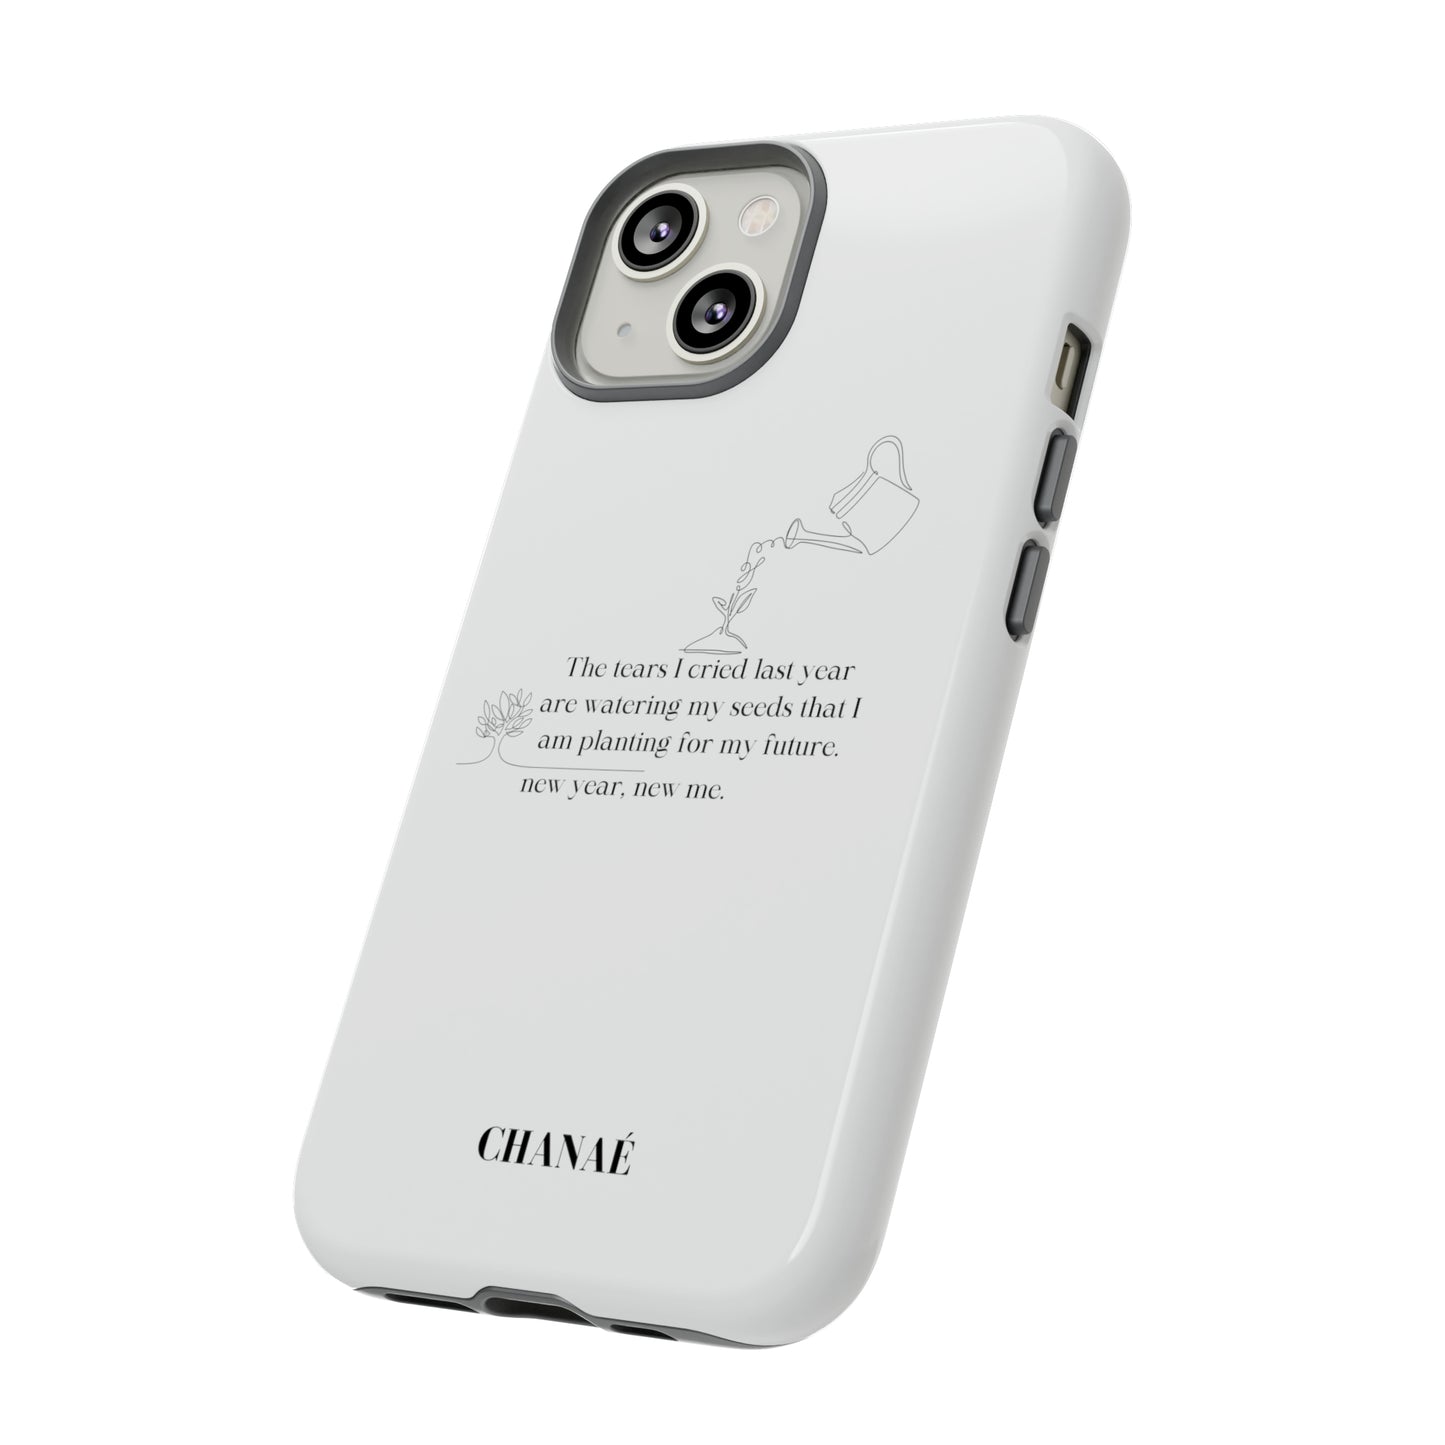 Last Year's Tears iPhone "Tough" Case (White)